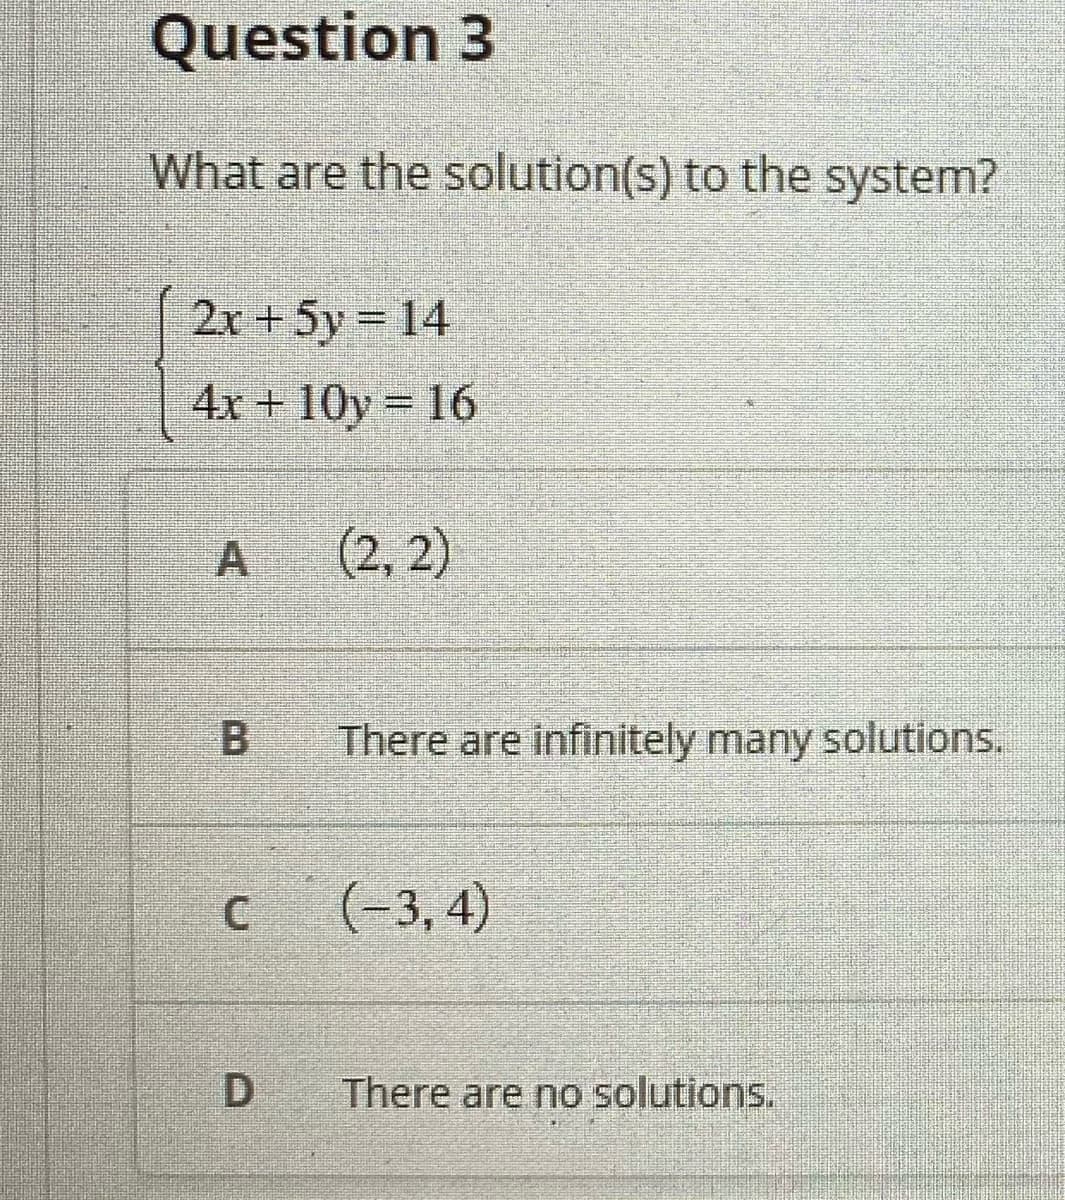 Question 3
What are the solution(s) to the system?
2x +5y 14
%3D
4x + 10y = 16
(2, 2)
There are infinitely many solutions.
(-3, 4)
There are no solutions.
A,
